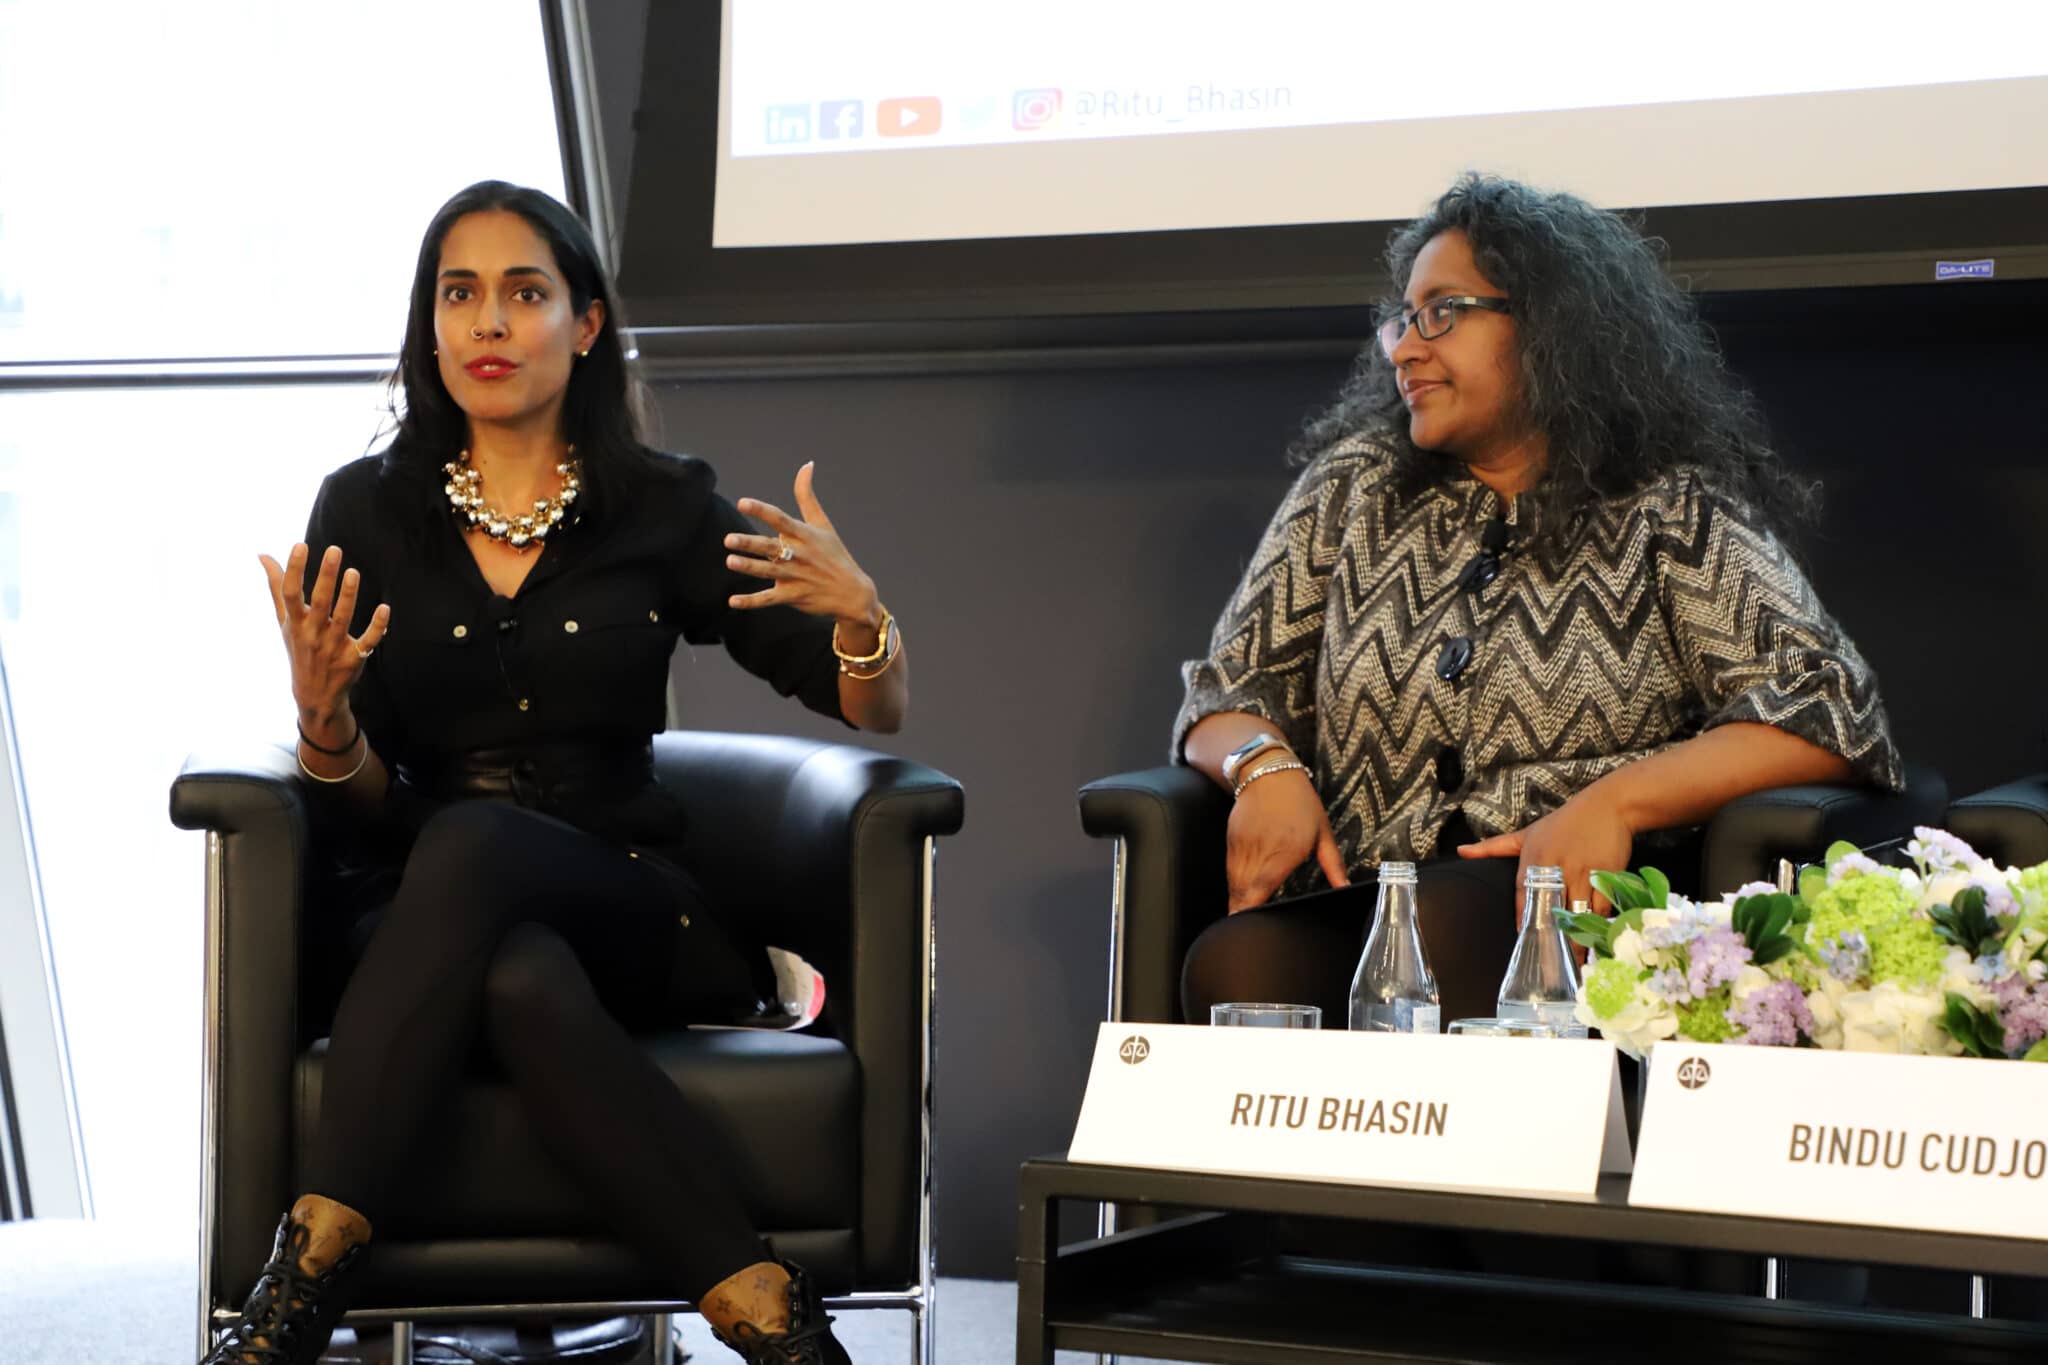 Ritu Bhasin sitting onstage in a chair speaking to an audience next to another woman of color as part of panel discussion